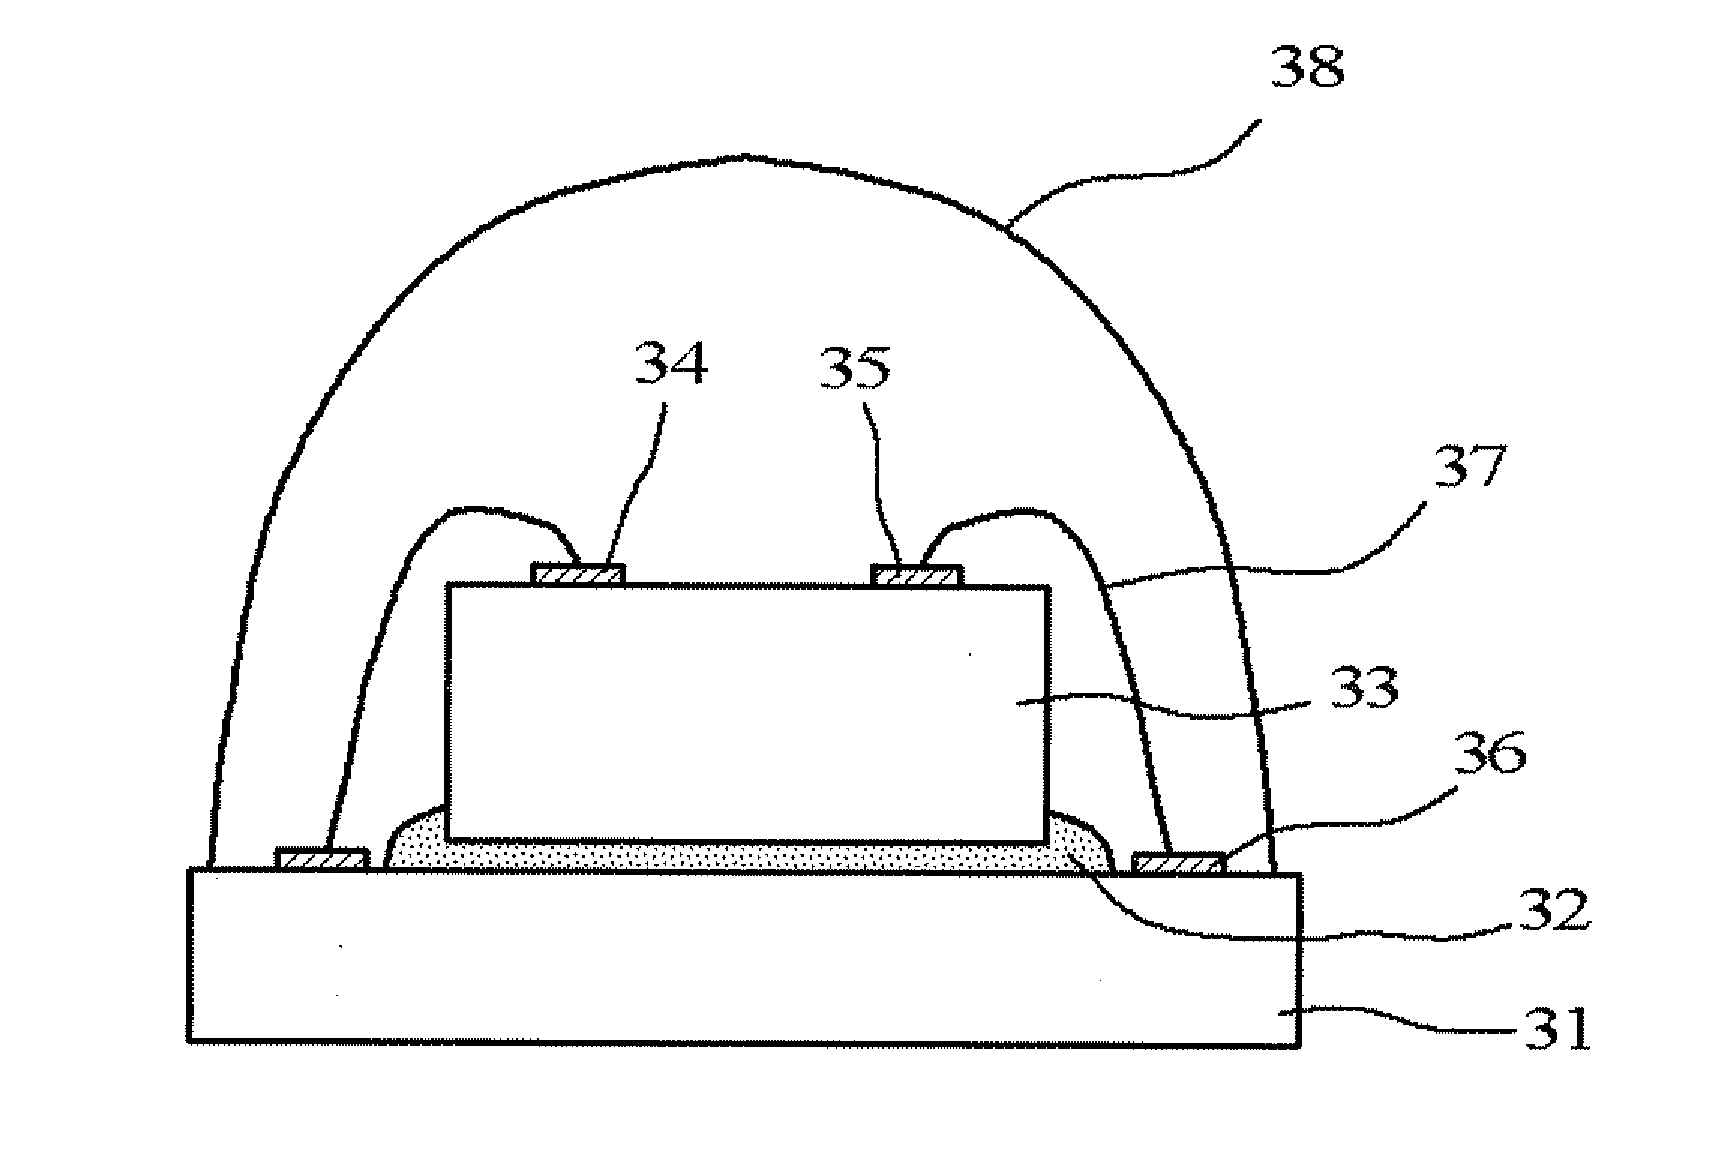 Light-reflective anisotropic conductive adhesive and light-emitting device